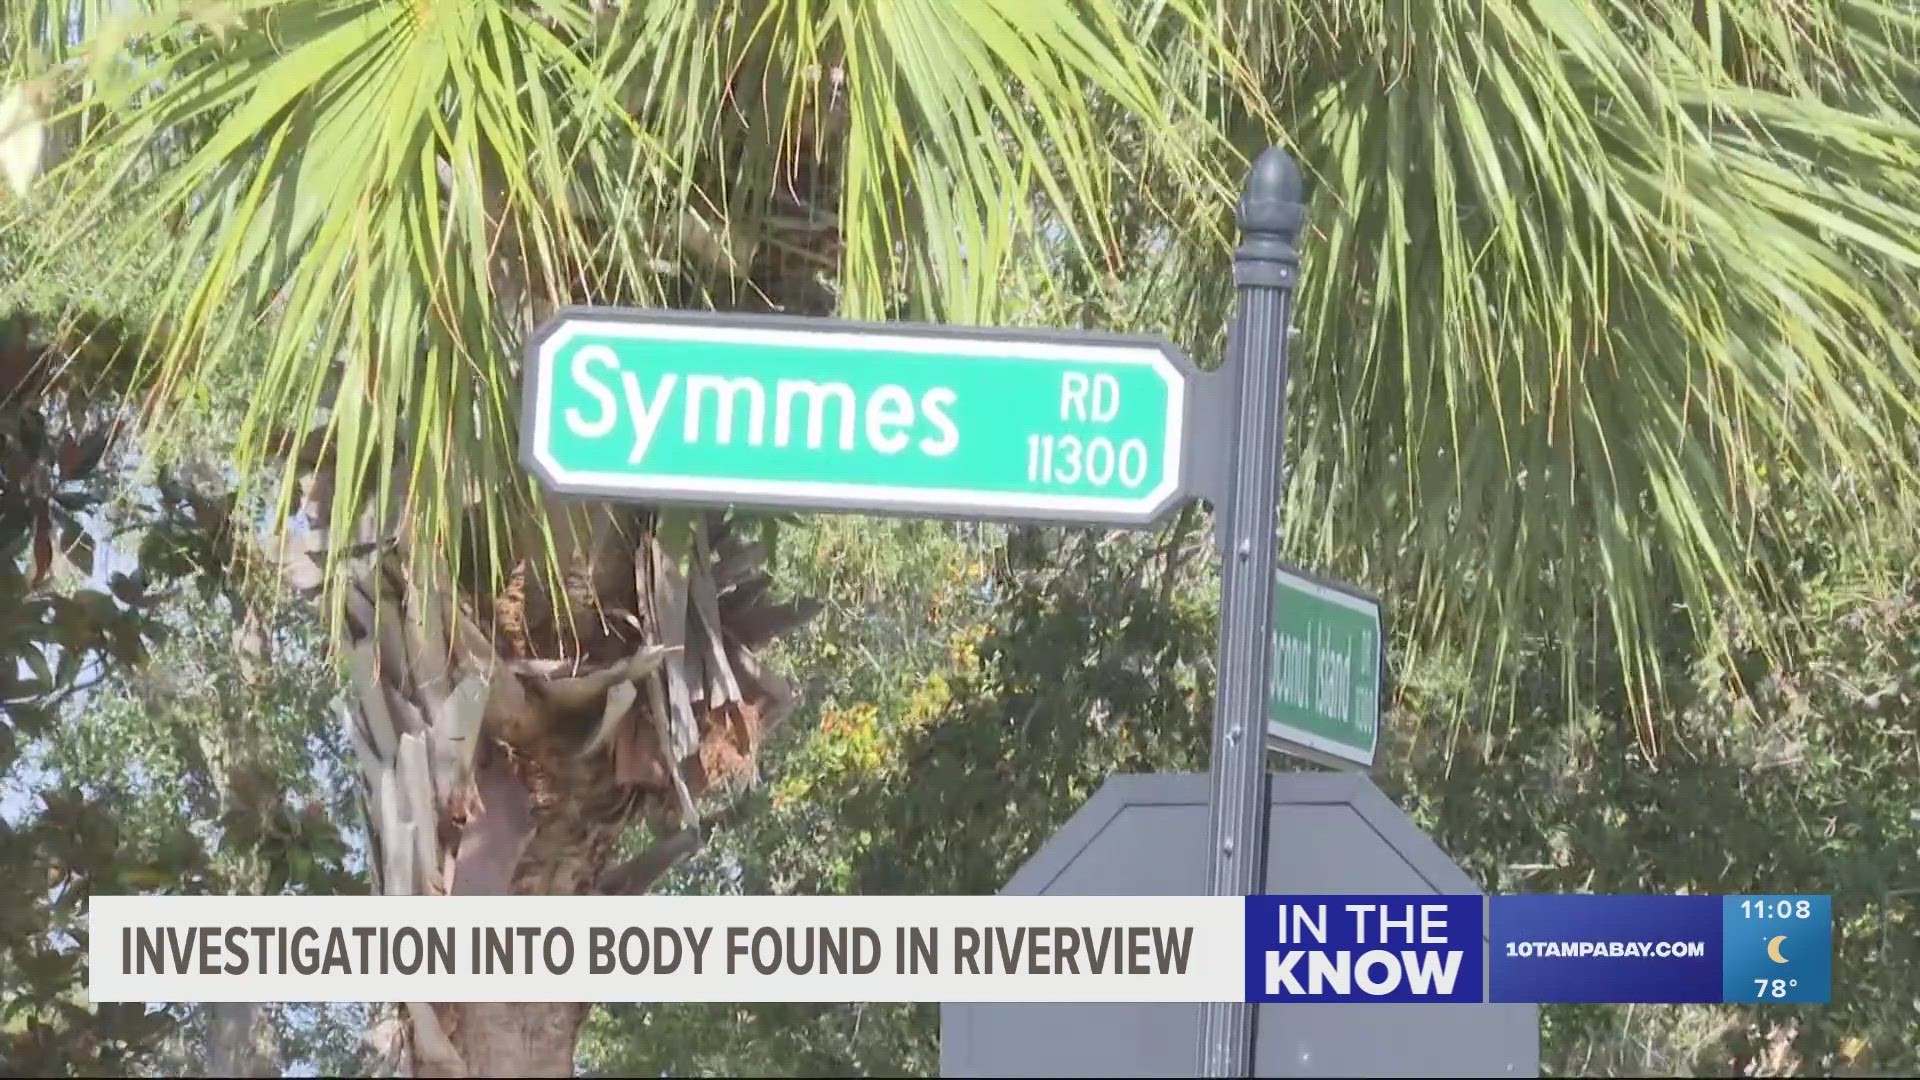 The man's body was found after deputies received a call about a person down in Riverview.